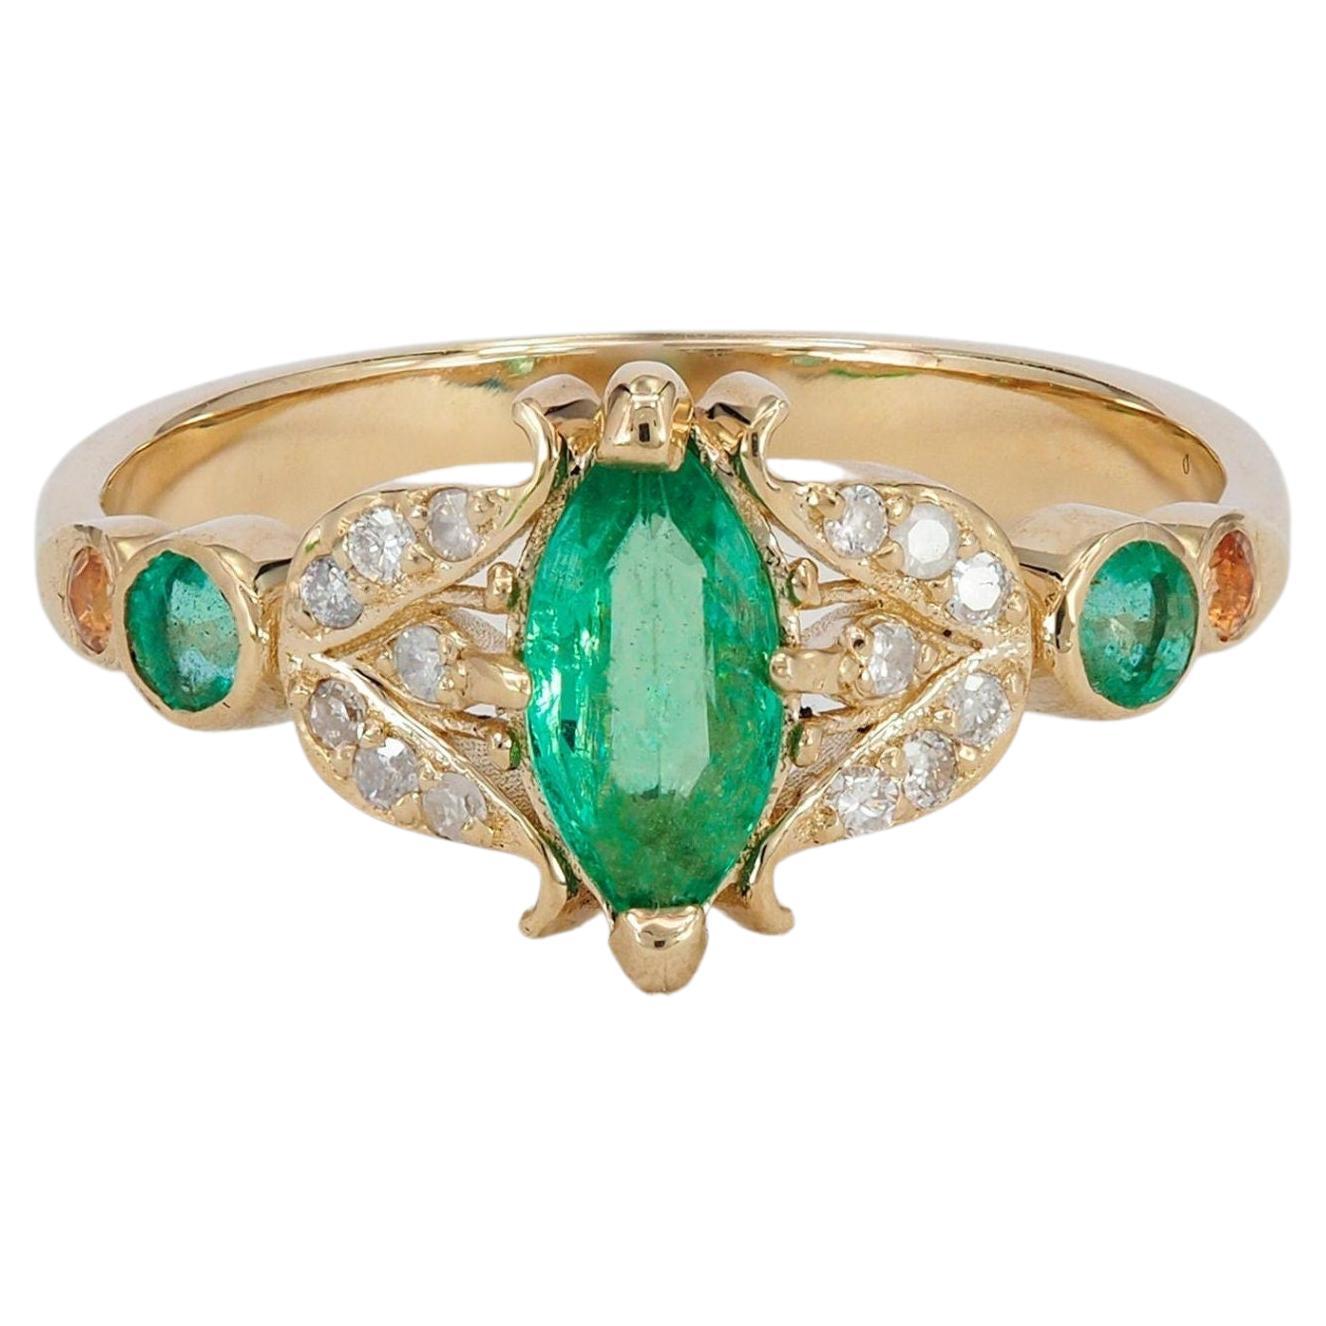 For Sale:  Marquise Cut Emerald Engagement Ring, Antique Emerald Vintage Engagement Ring